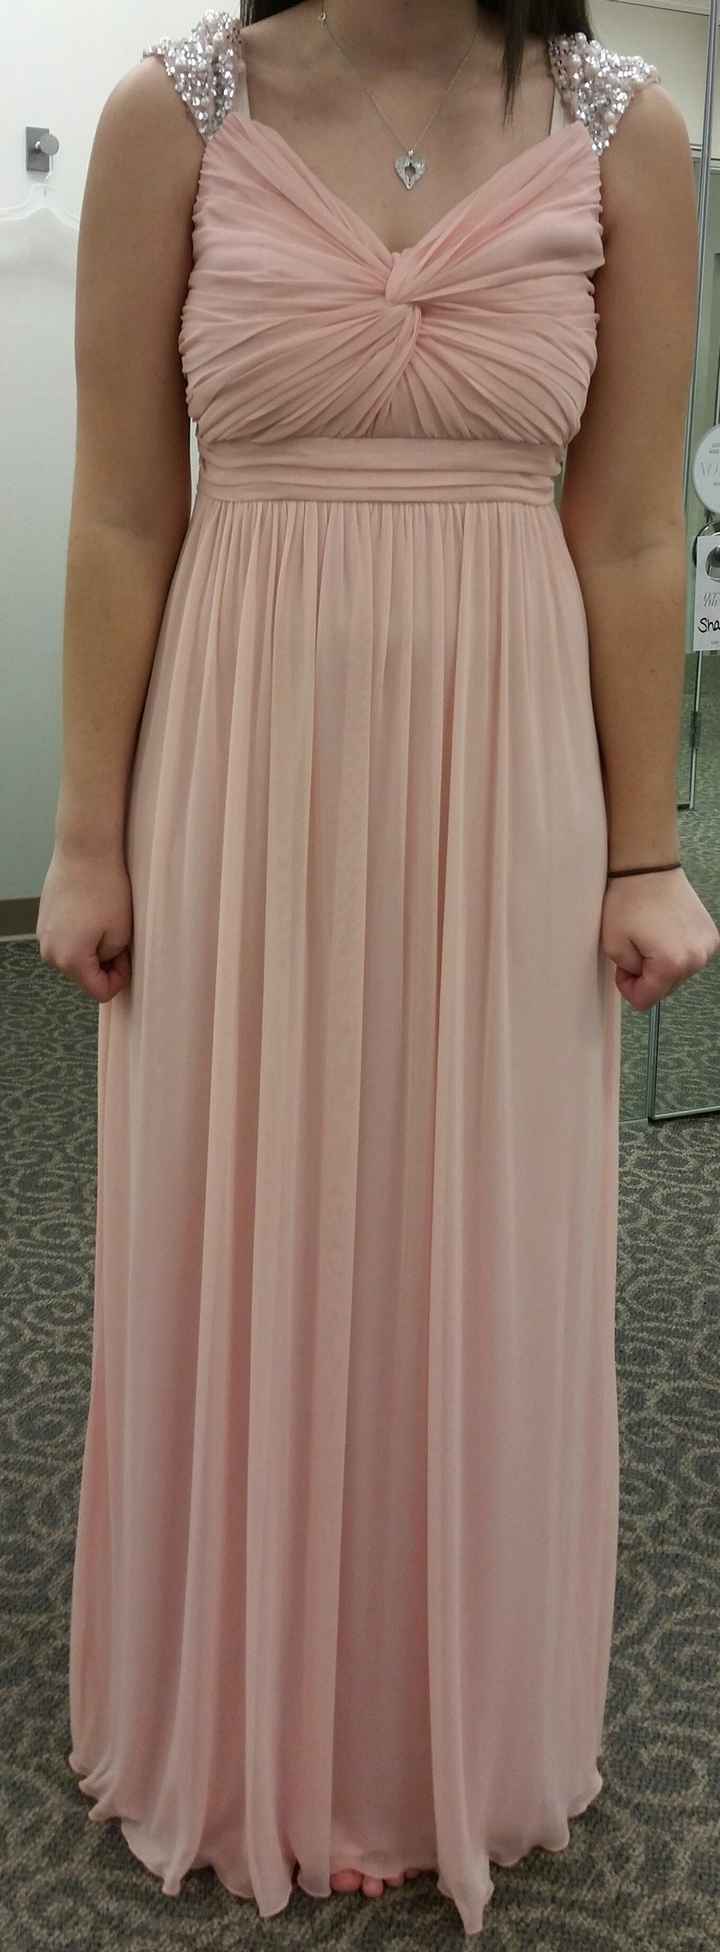 We found our bridesmaid dresses!! Score! What do you think?